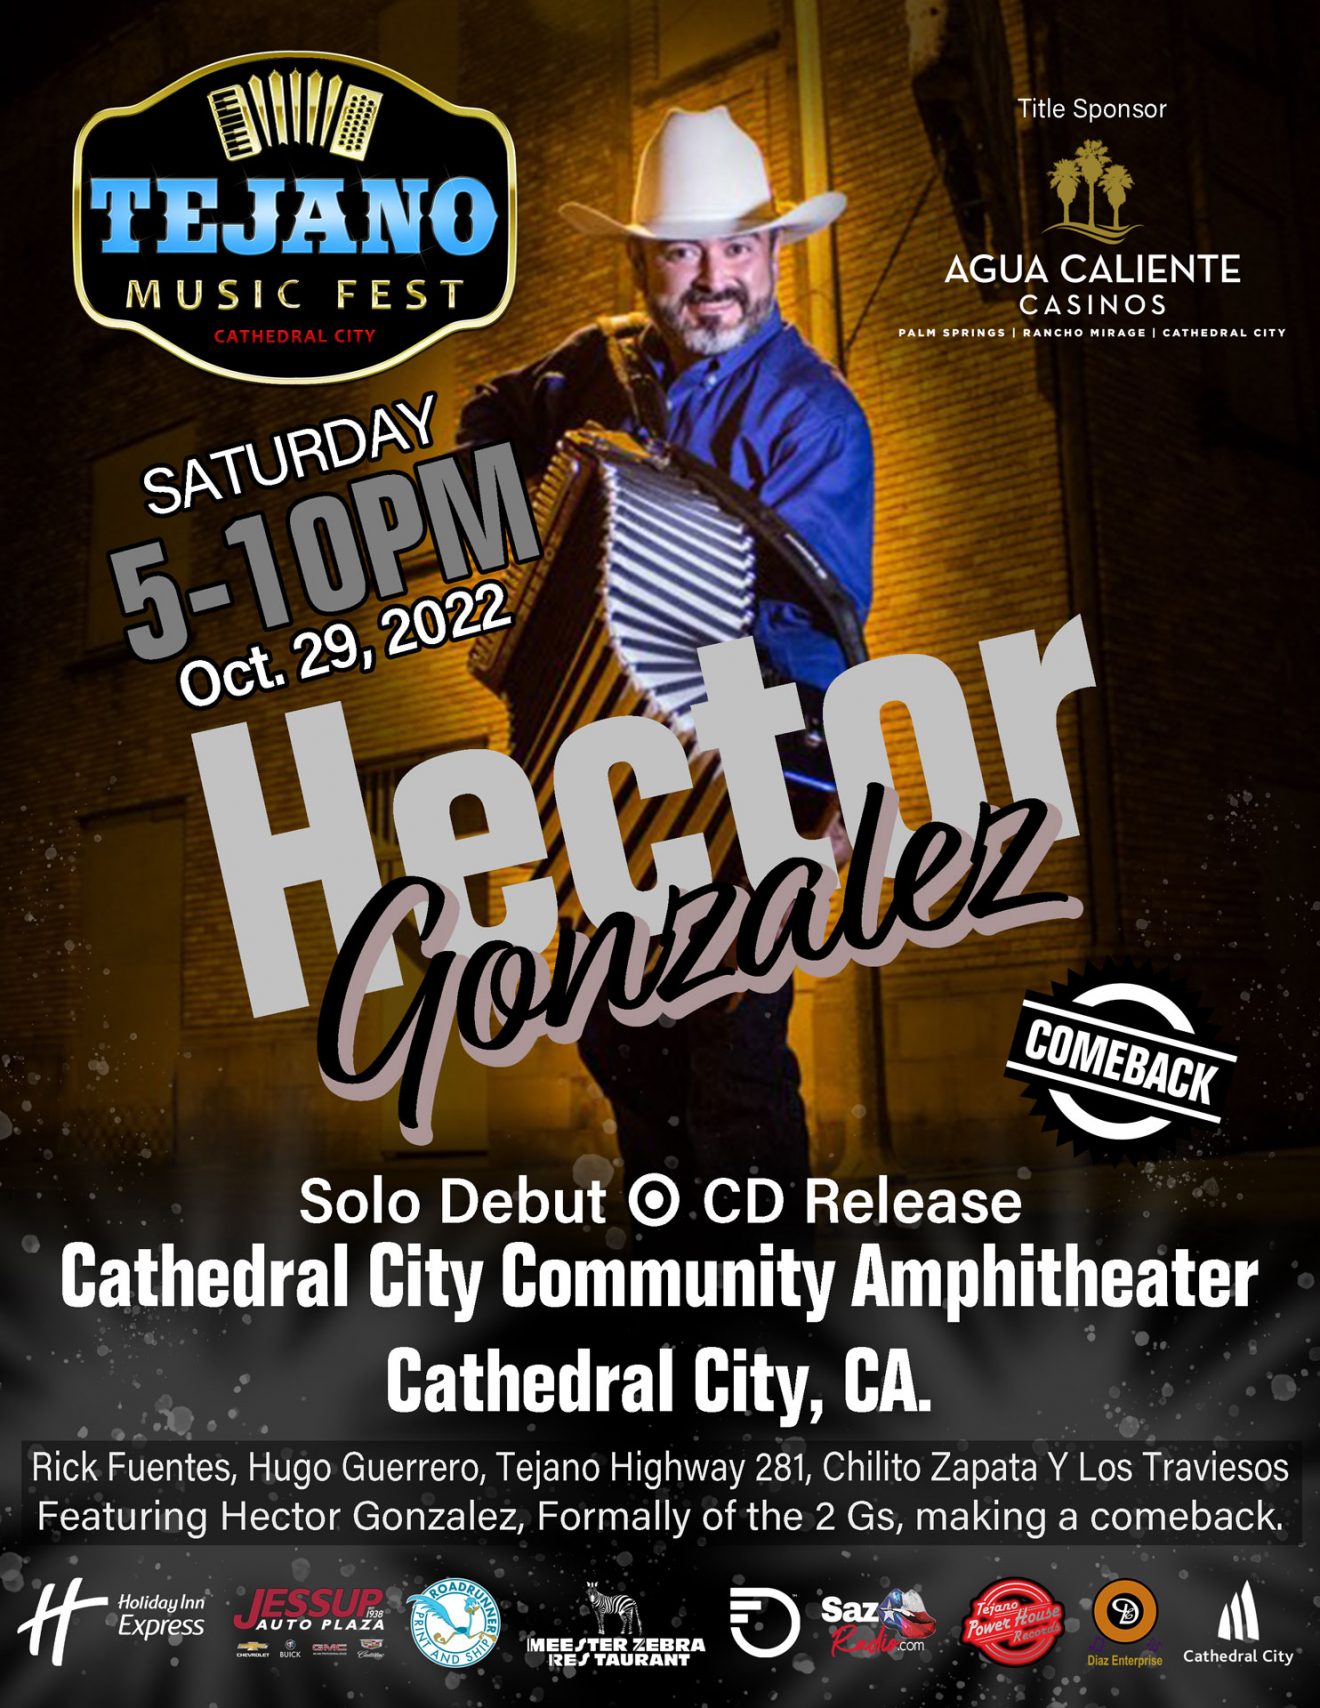 New Artist Announced, Tickets Still Available for 2022 Tejano Music Fest in Cathedral City